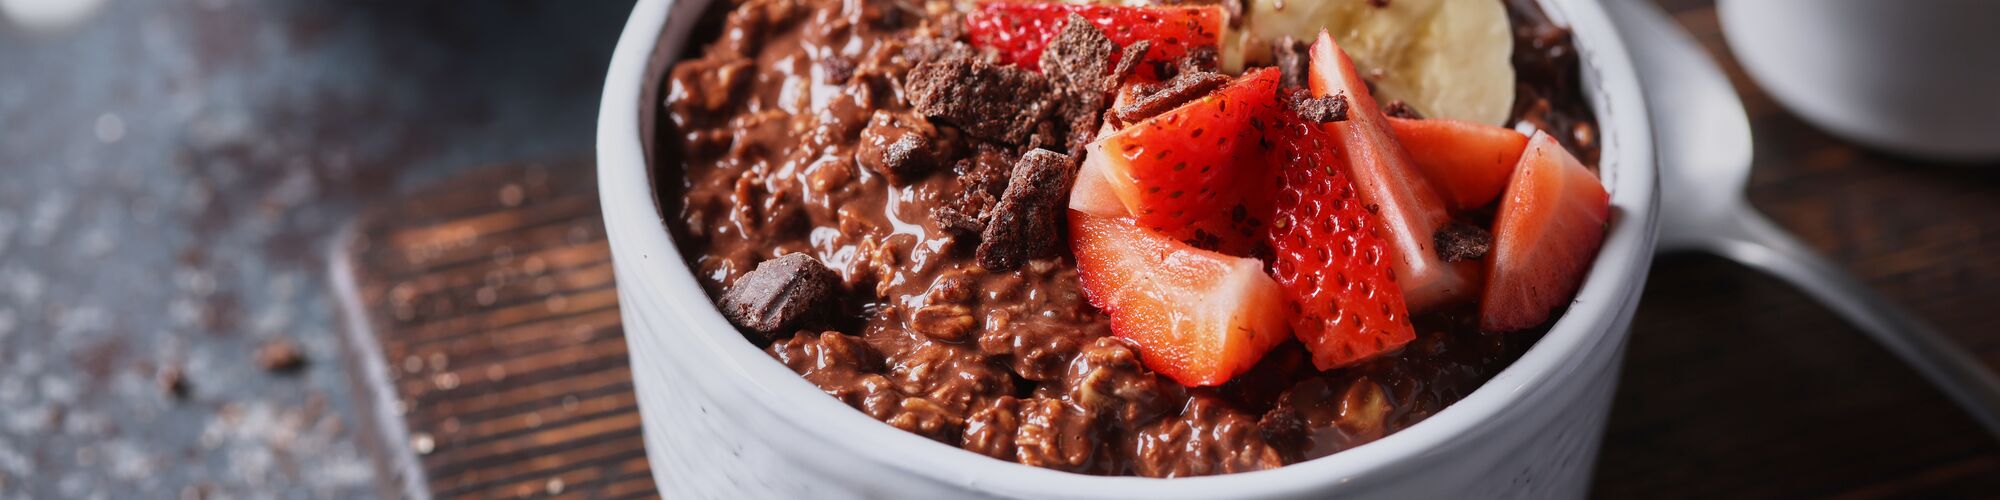 Mexican Chocolate Overnight Oats